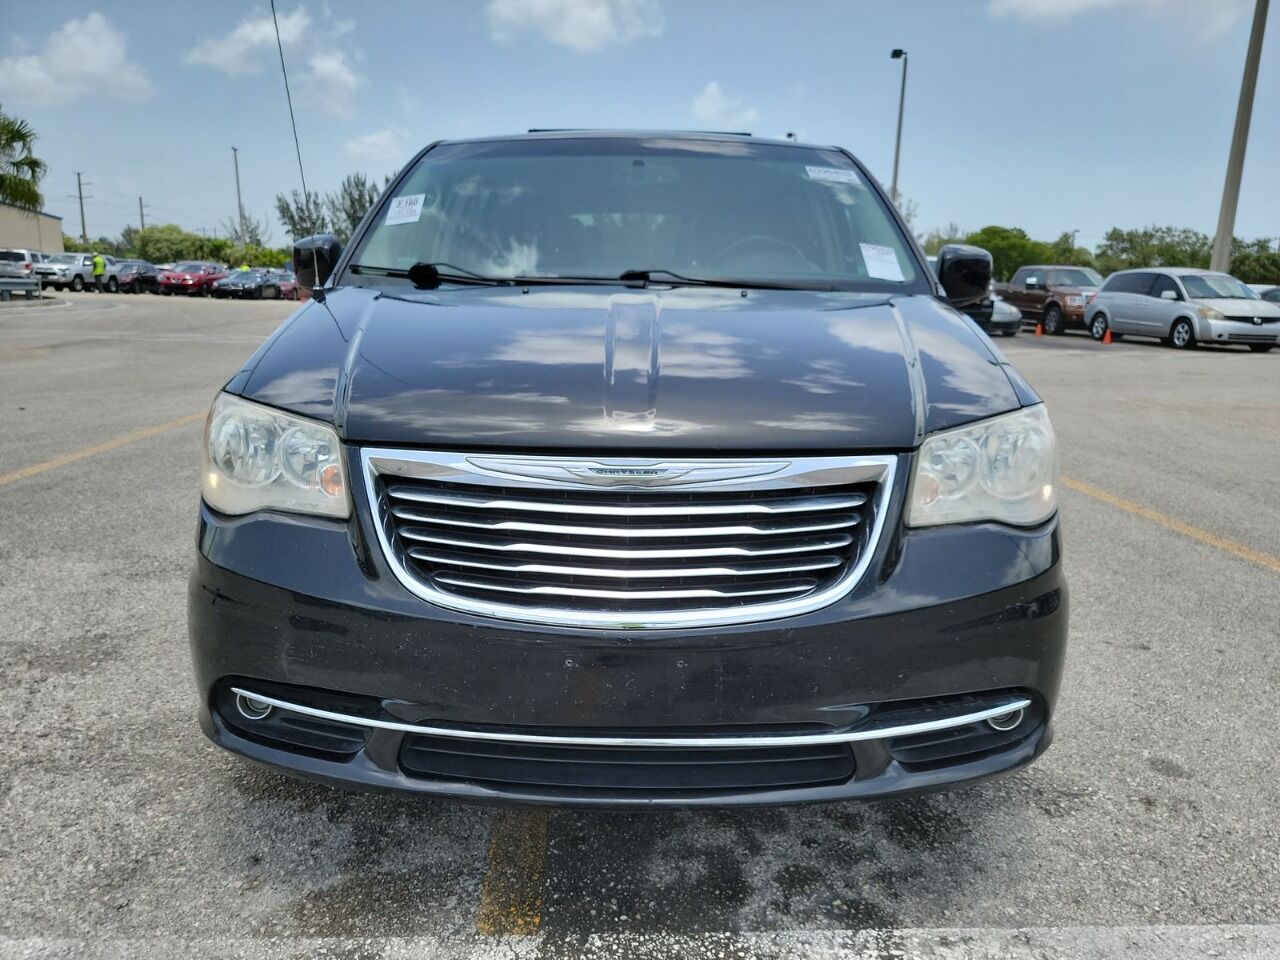 2012 Chrysler Town and Country Minivan - $2,995